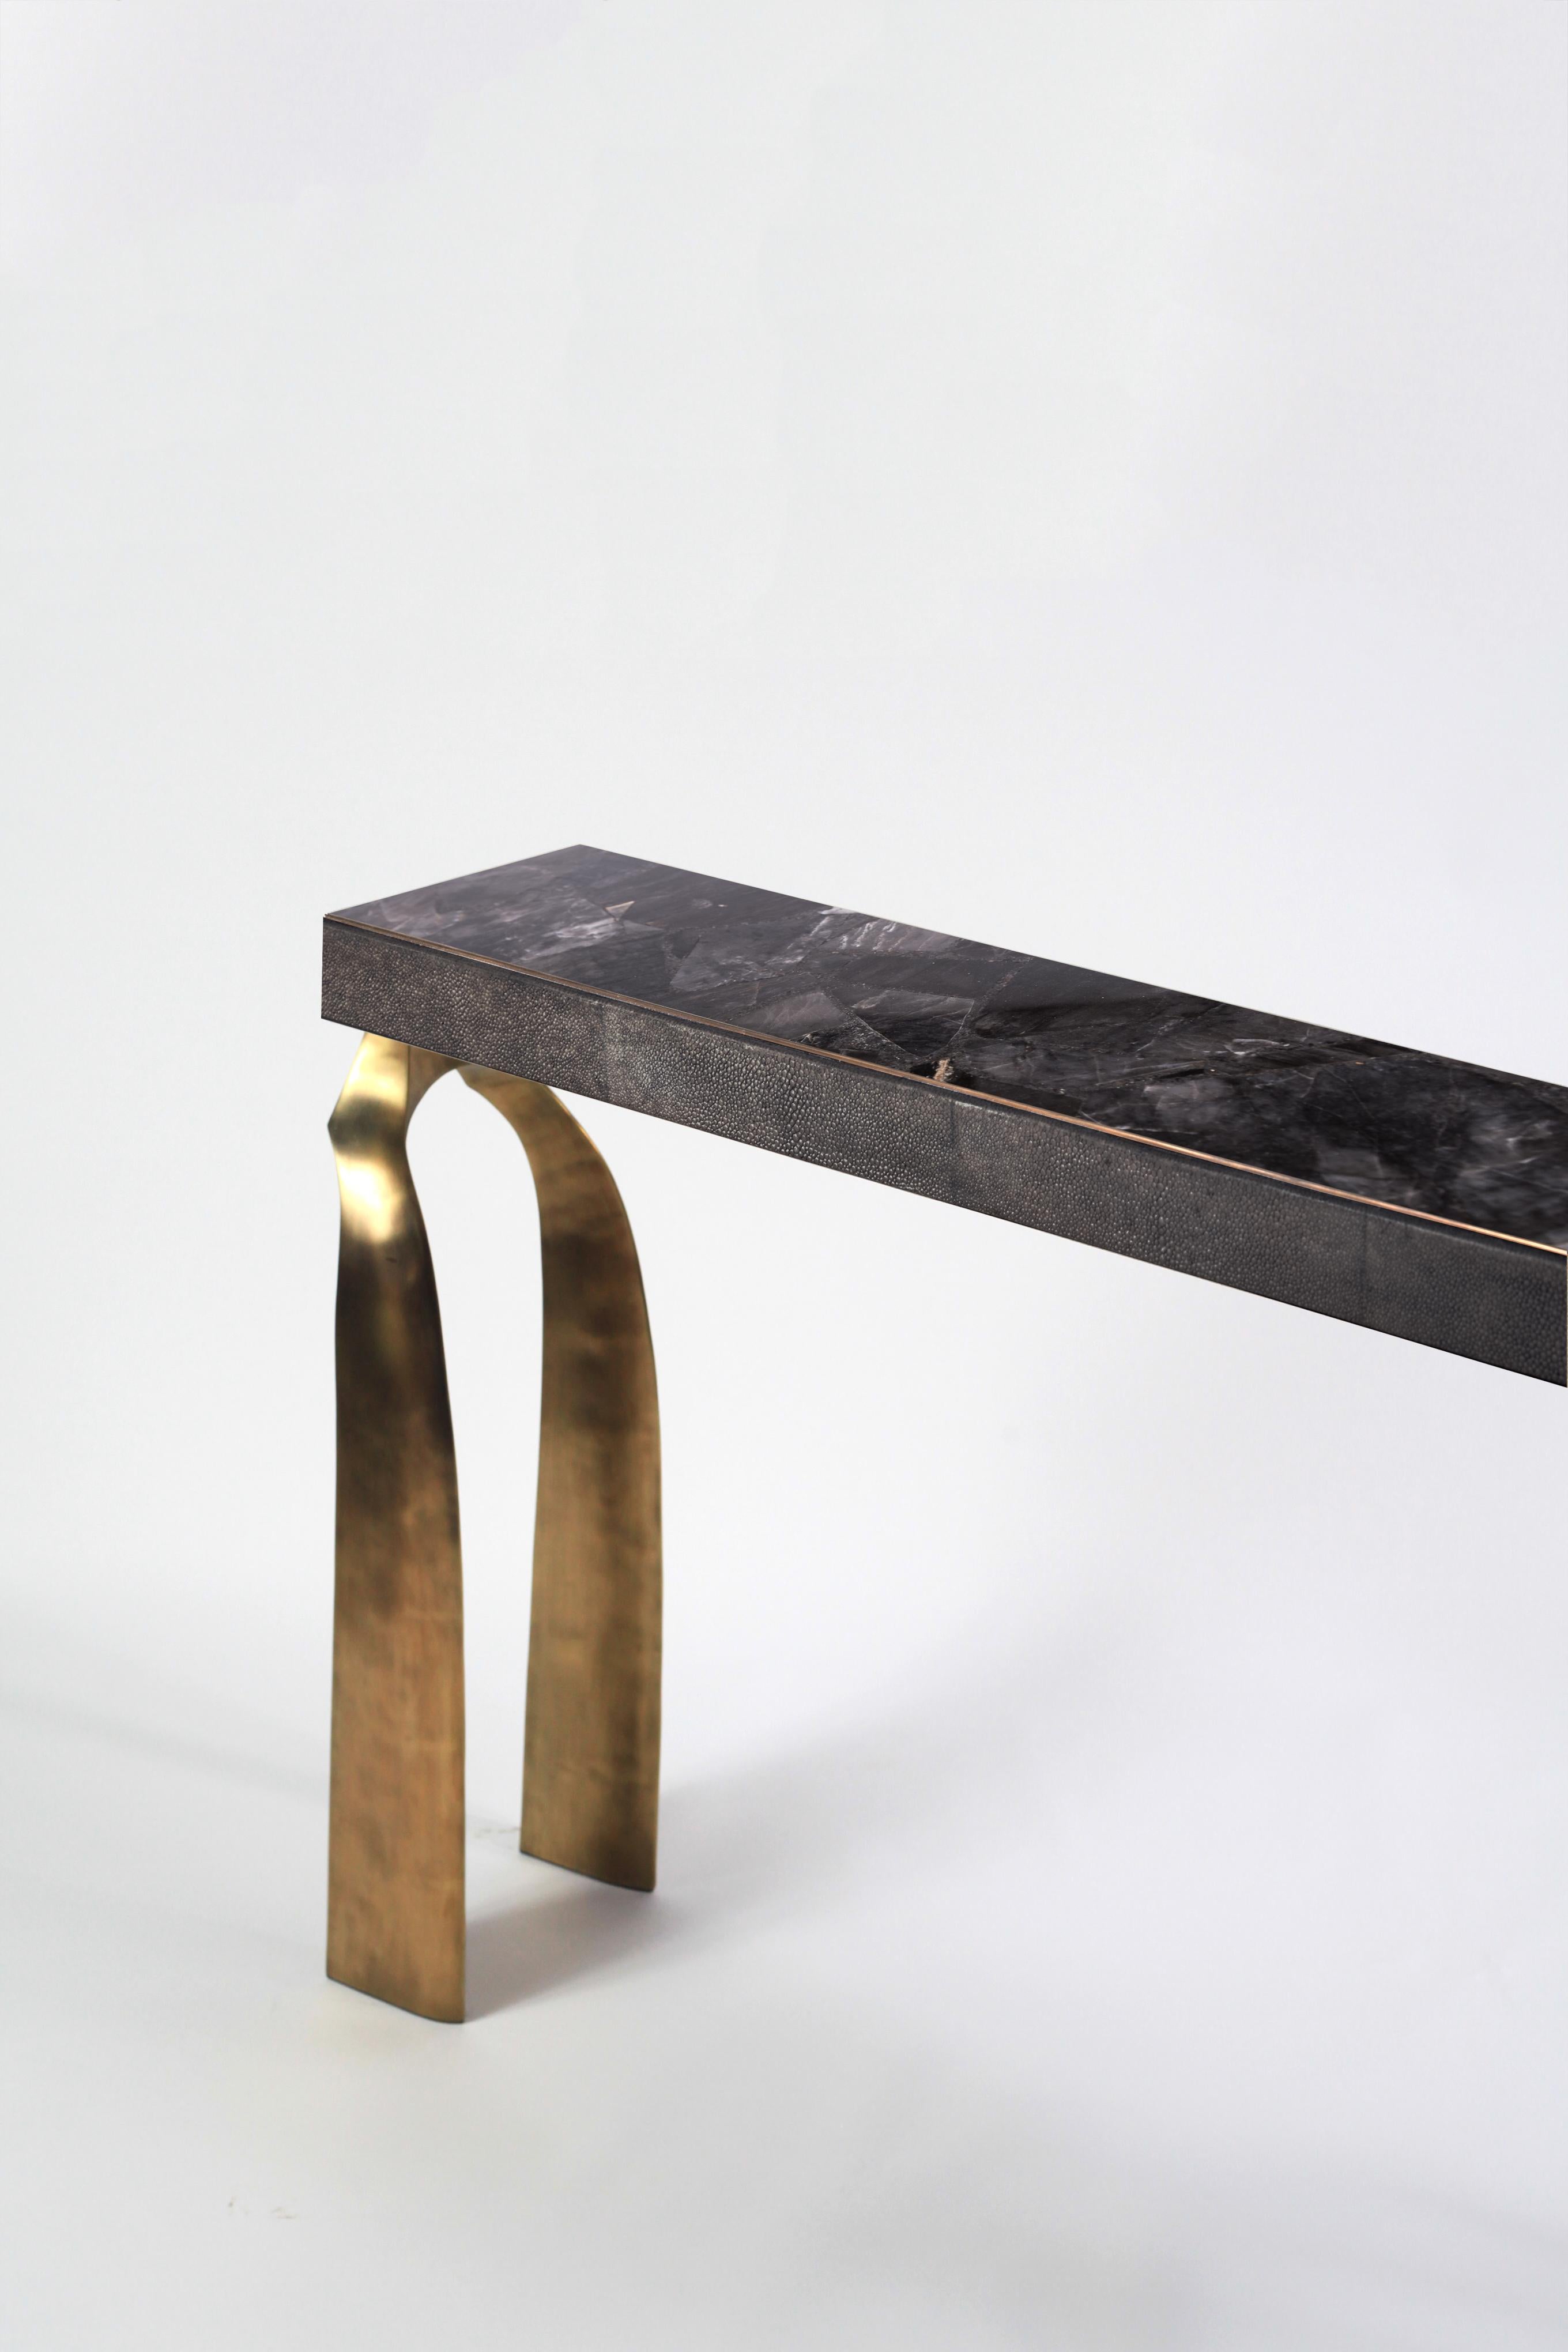 The Galaxy console table is both dramatic and organic it’s unique design. The black quartz top, with coal black shagreen inlaid borders, sits on a pair of ethereal and sculptural bronze-patina brass legs. This console table comes in different